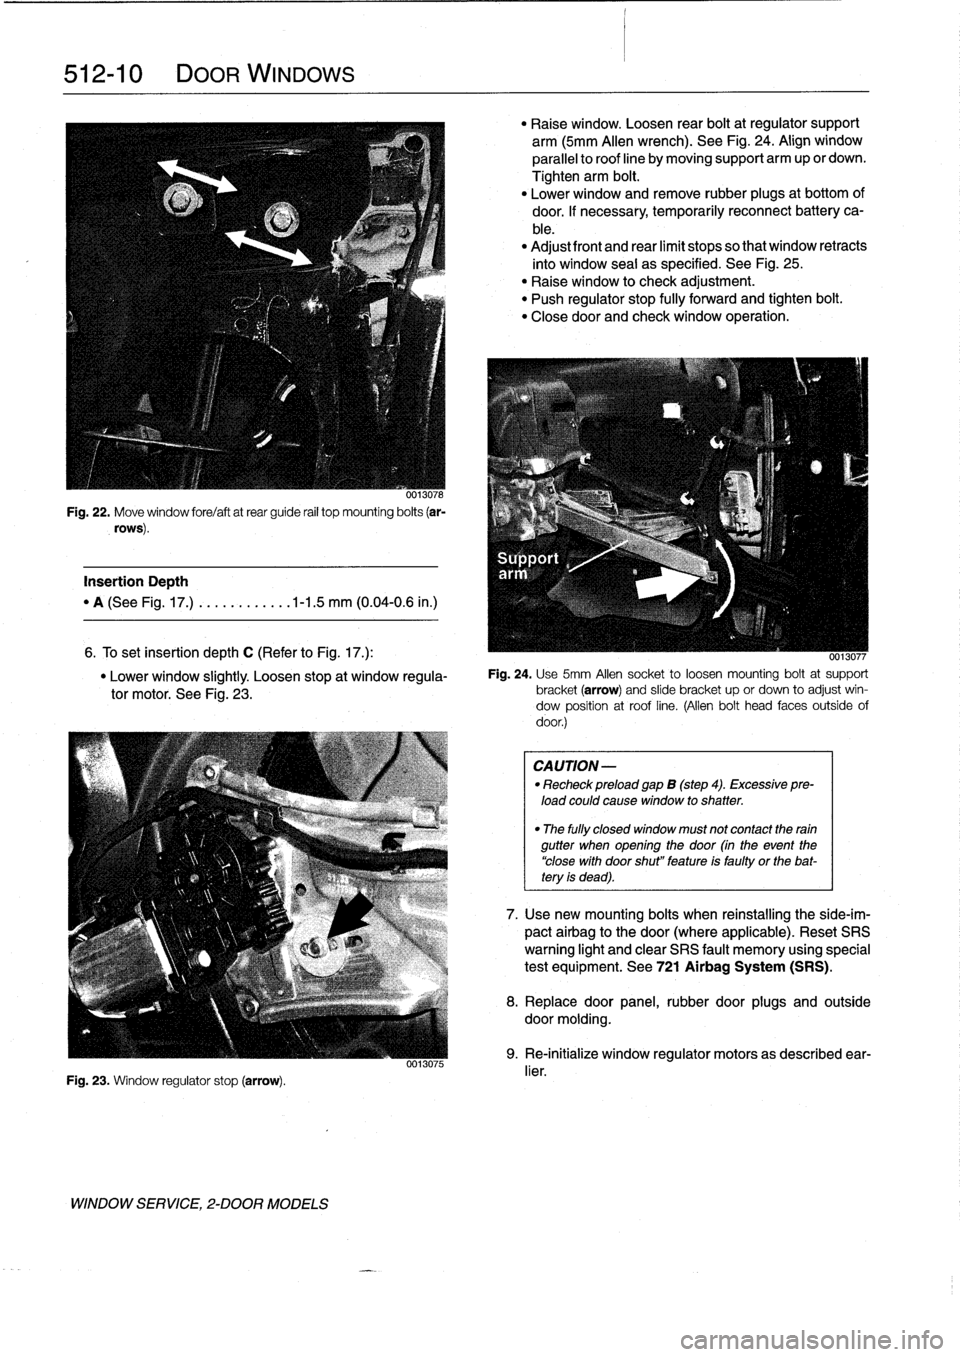 BMW 328i 1995 E36 Workshop Manual 
512-
1
0

	

DOOR
WINDOWS

0013078

Fig
.
22
.
Move
window
fore/aftatrear
guide
rail
top
mounting
bolts
(ar-

rows)
.

Insertion
Depth

"
A
(See
Fig
.
17
.)
.
..........
.1-1
.5
mm
(0
.04-0
.6
in
.)
